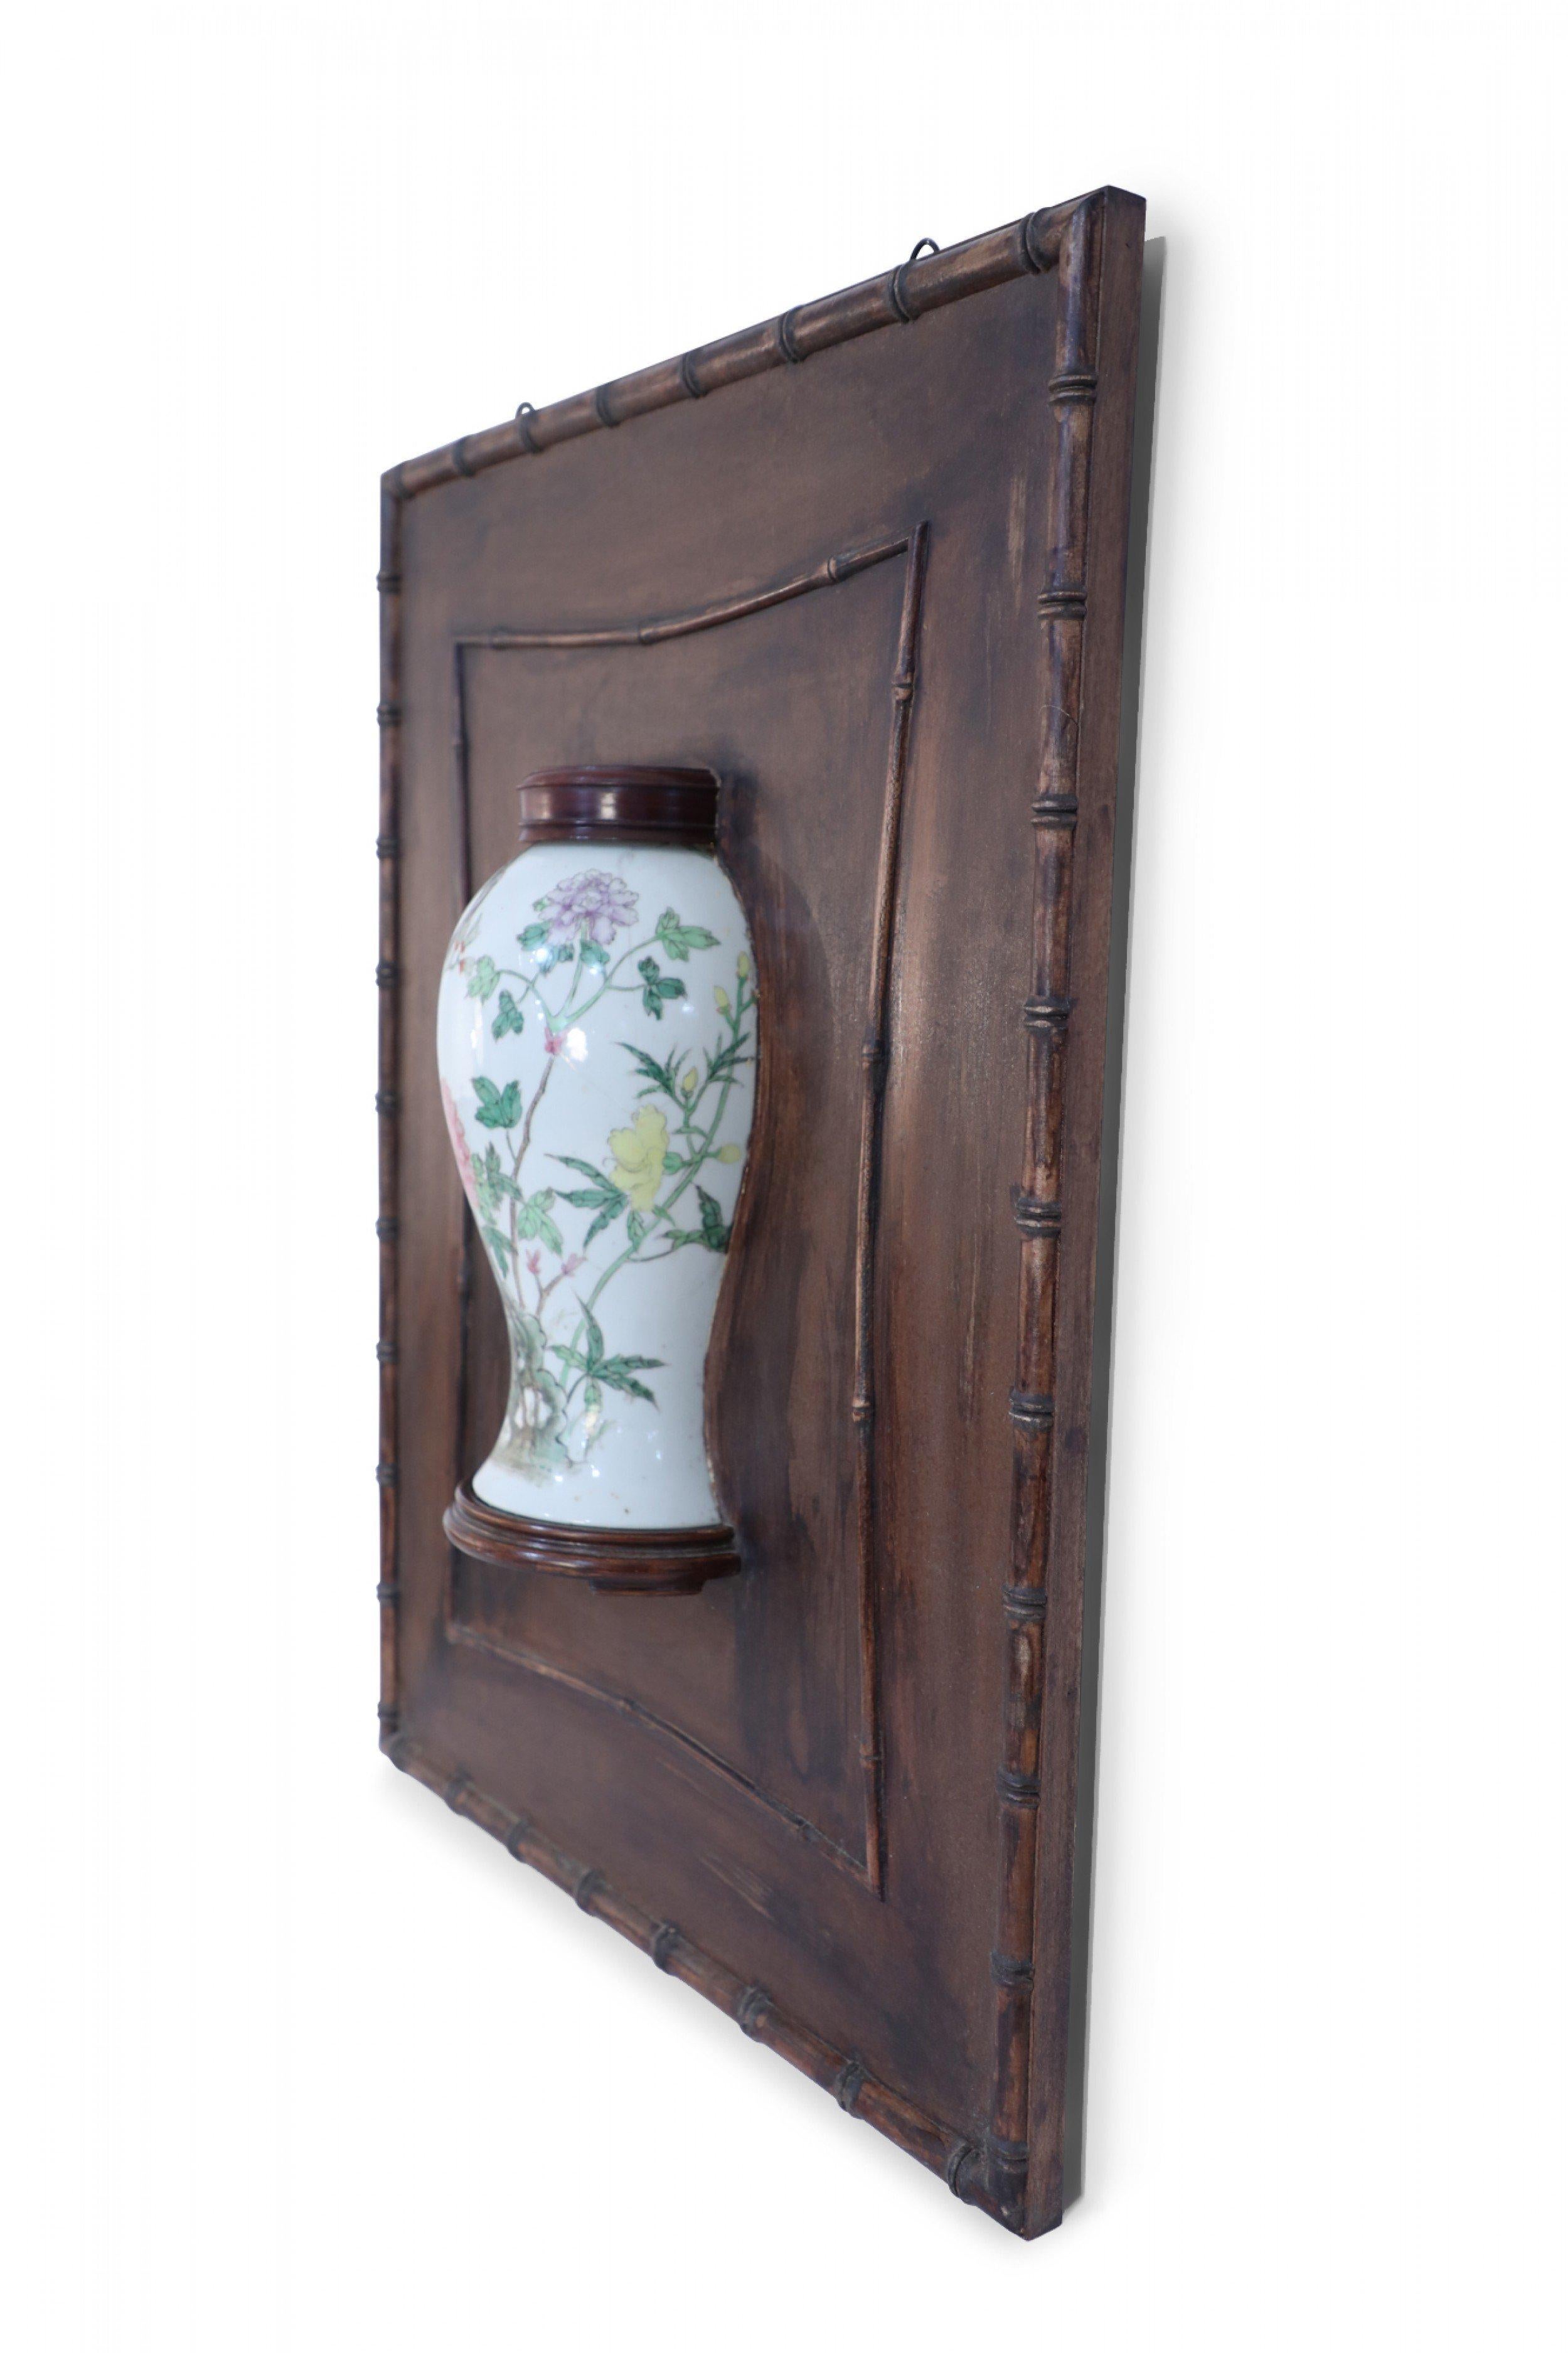 Chinese wall plaque framing a bisected famille rose porcelain lidded vase, depicting trees and blooming florals, in wood with a decorative faux bamboo edge.